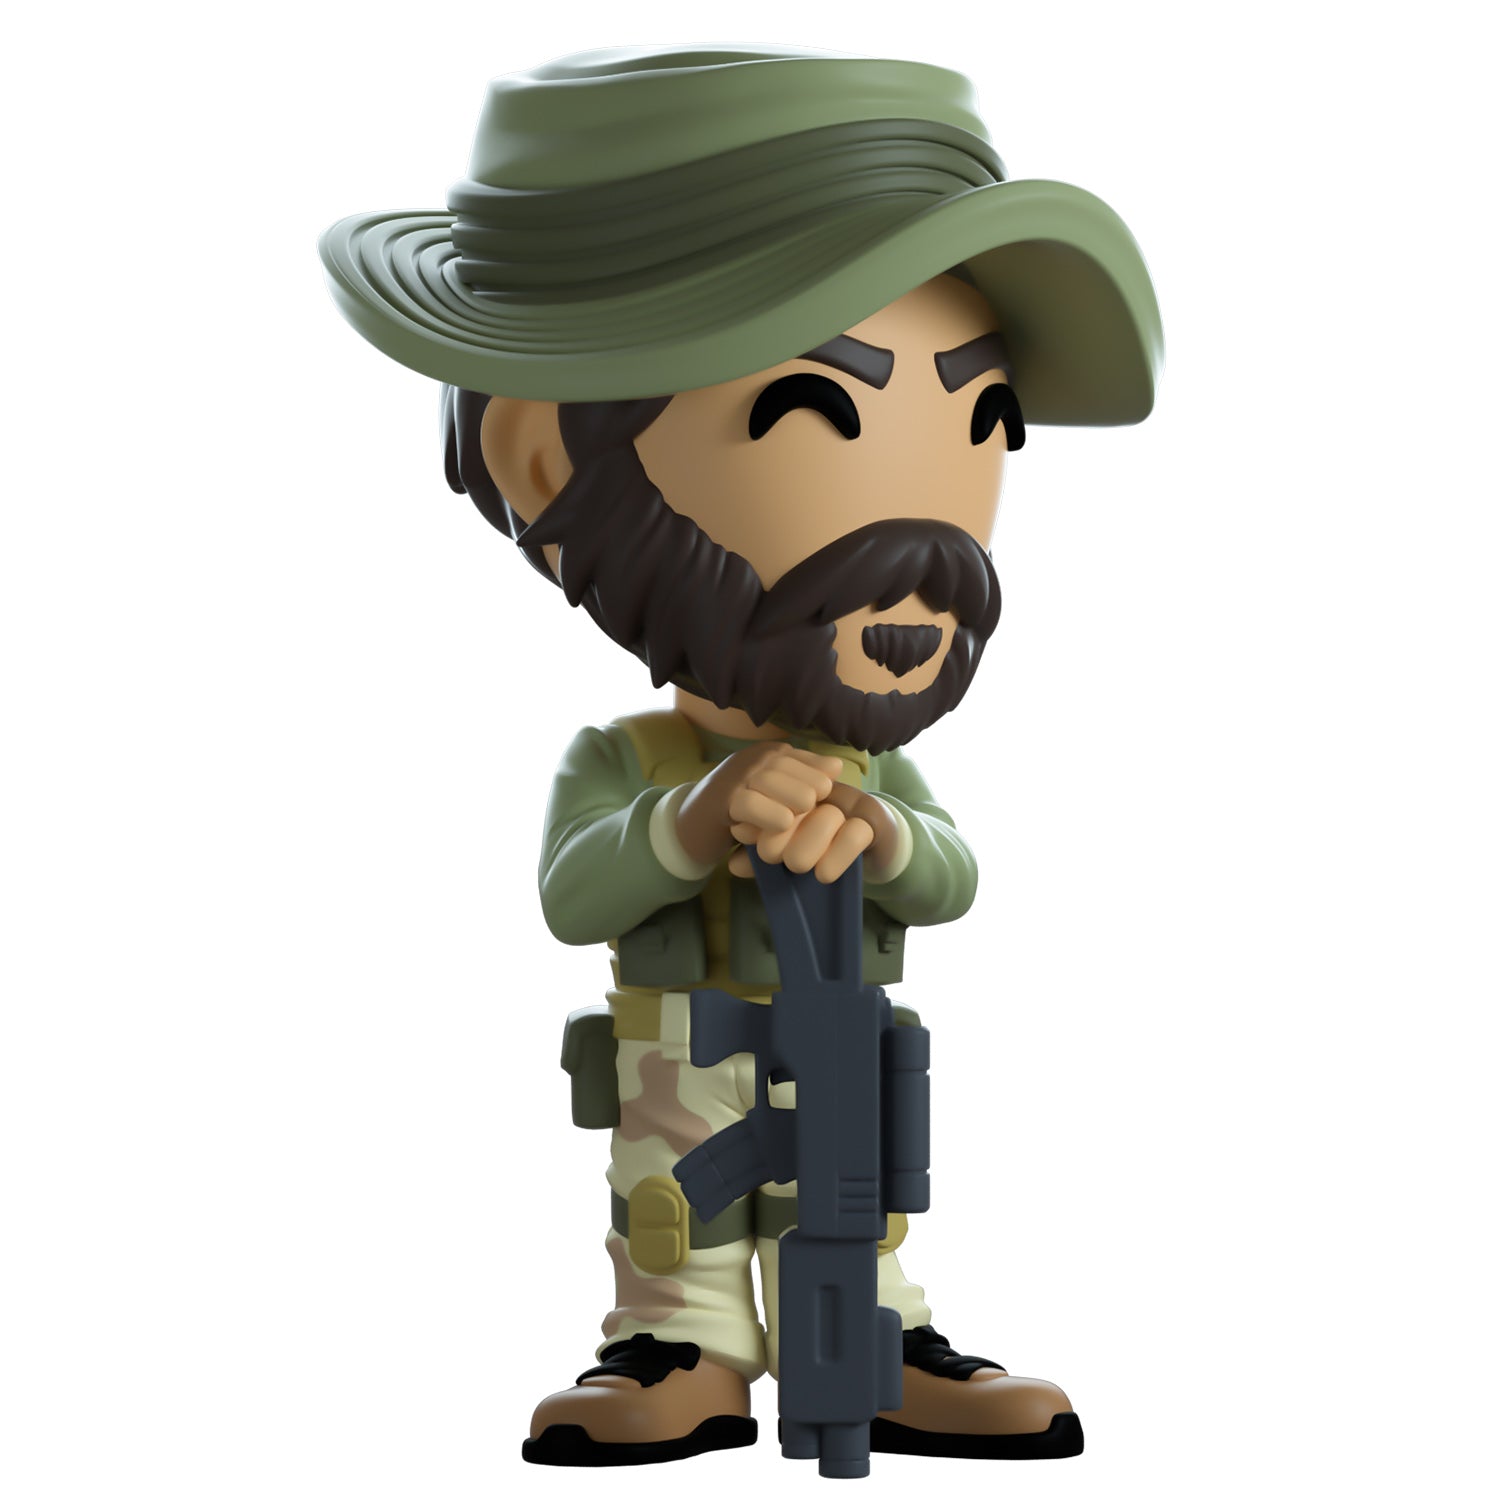 Call of Duty Captain Price Youtooz Figurine - Front Side View